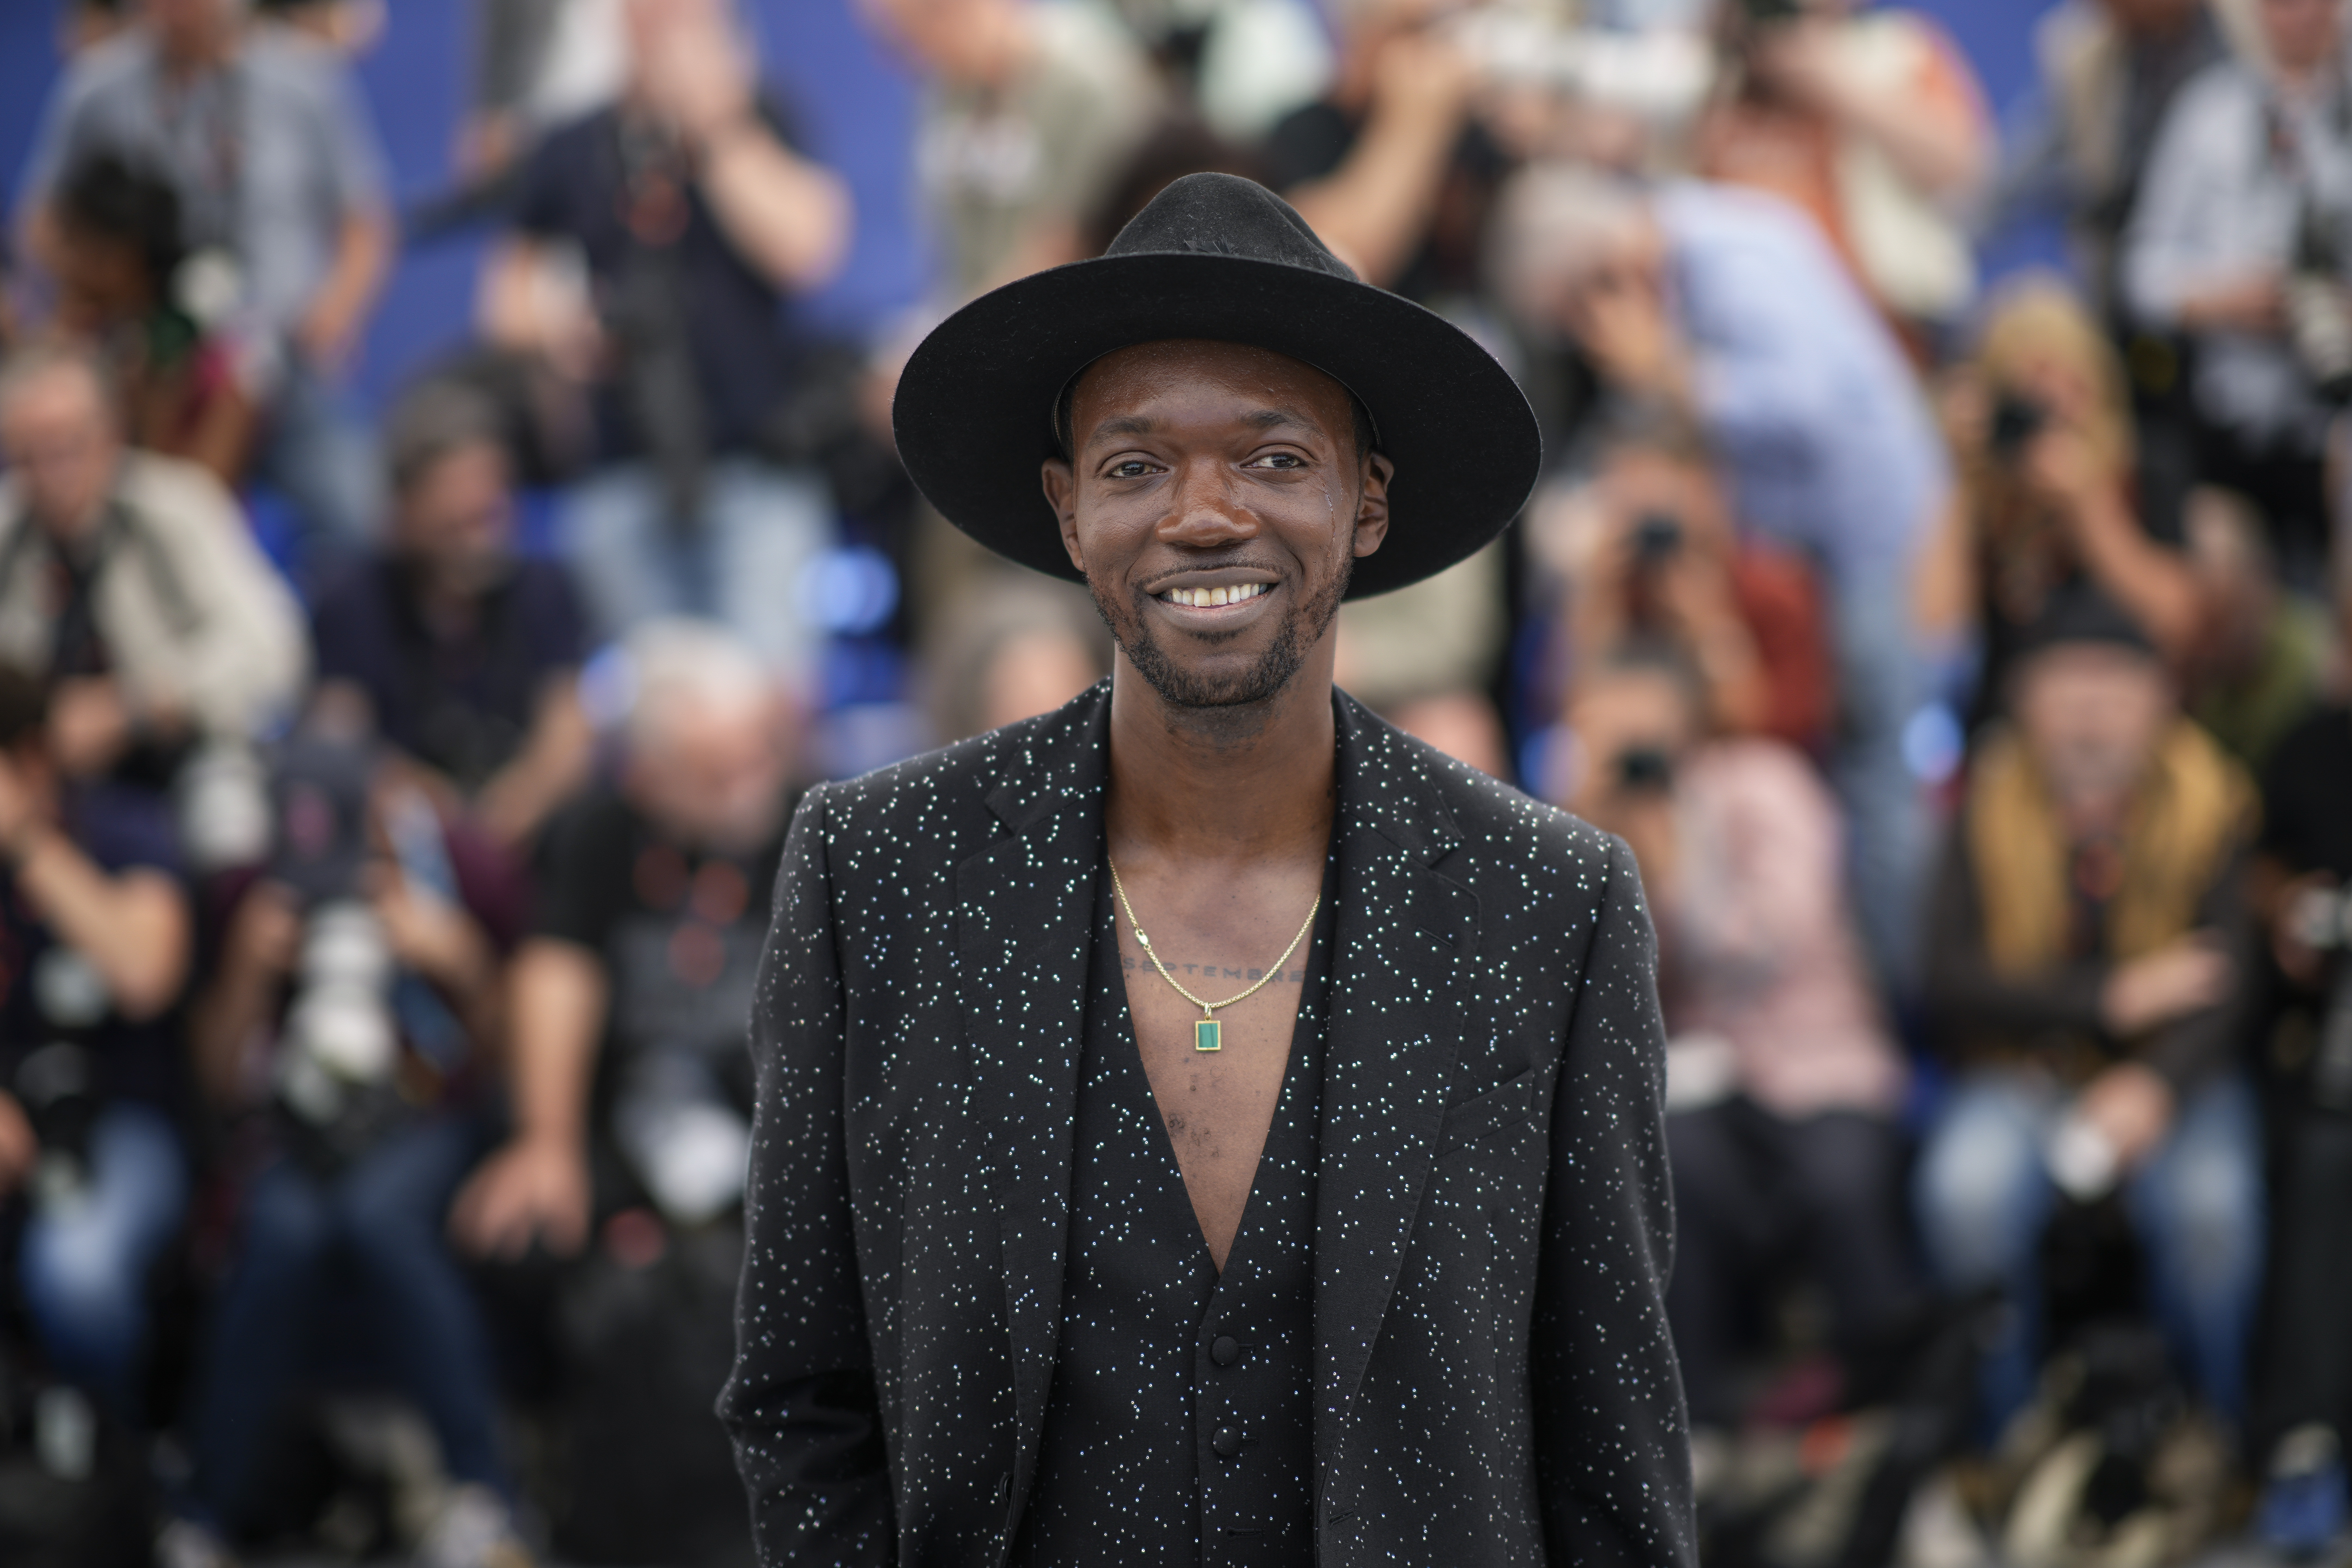 Baloji poses for photographers at the photo call for the film "Omen" at the 76th International Film Festival, Cannes, southern France, Monday, May 22, 2023. Photo credit: Daniel Cole, The Associated Press